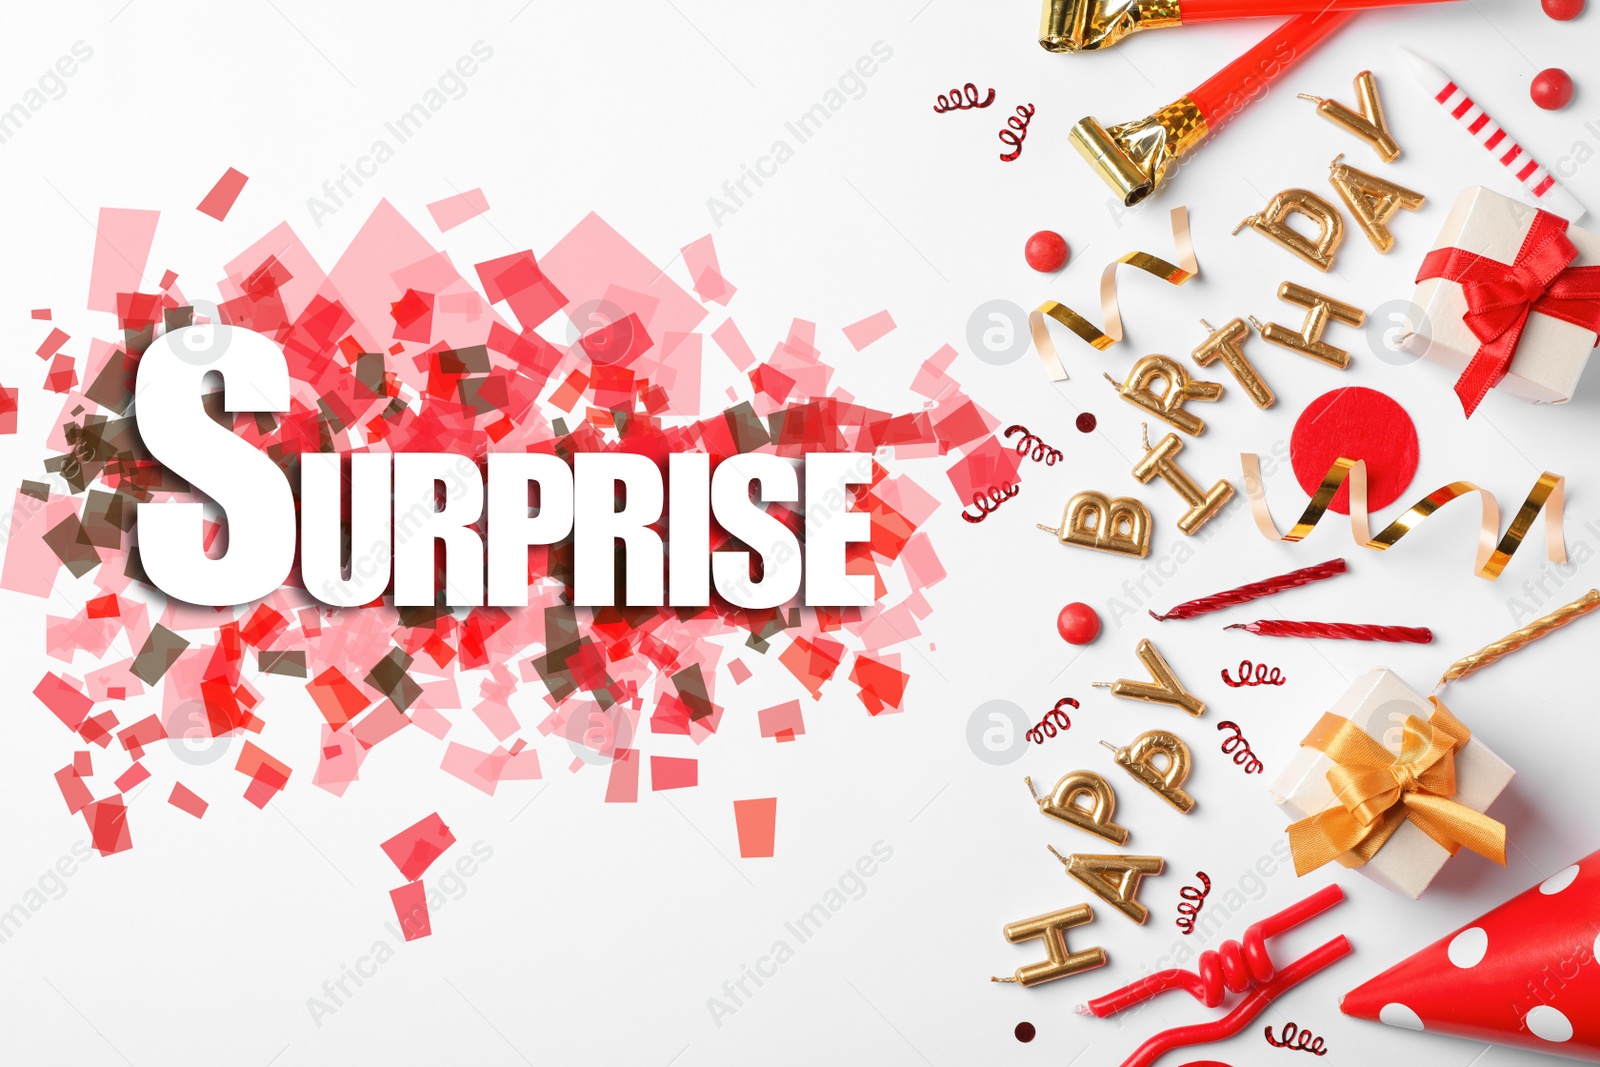 Image of Flat lay composition with different items for surprise party on white background